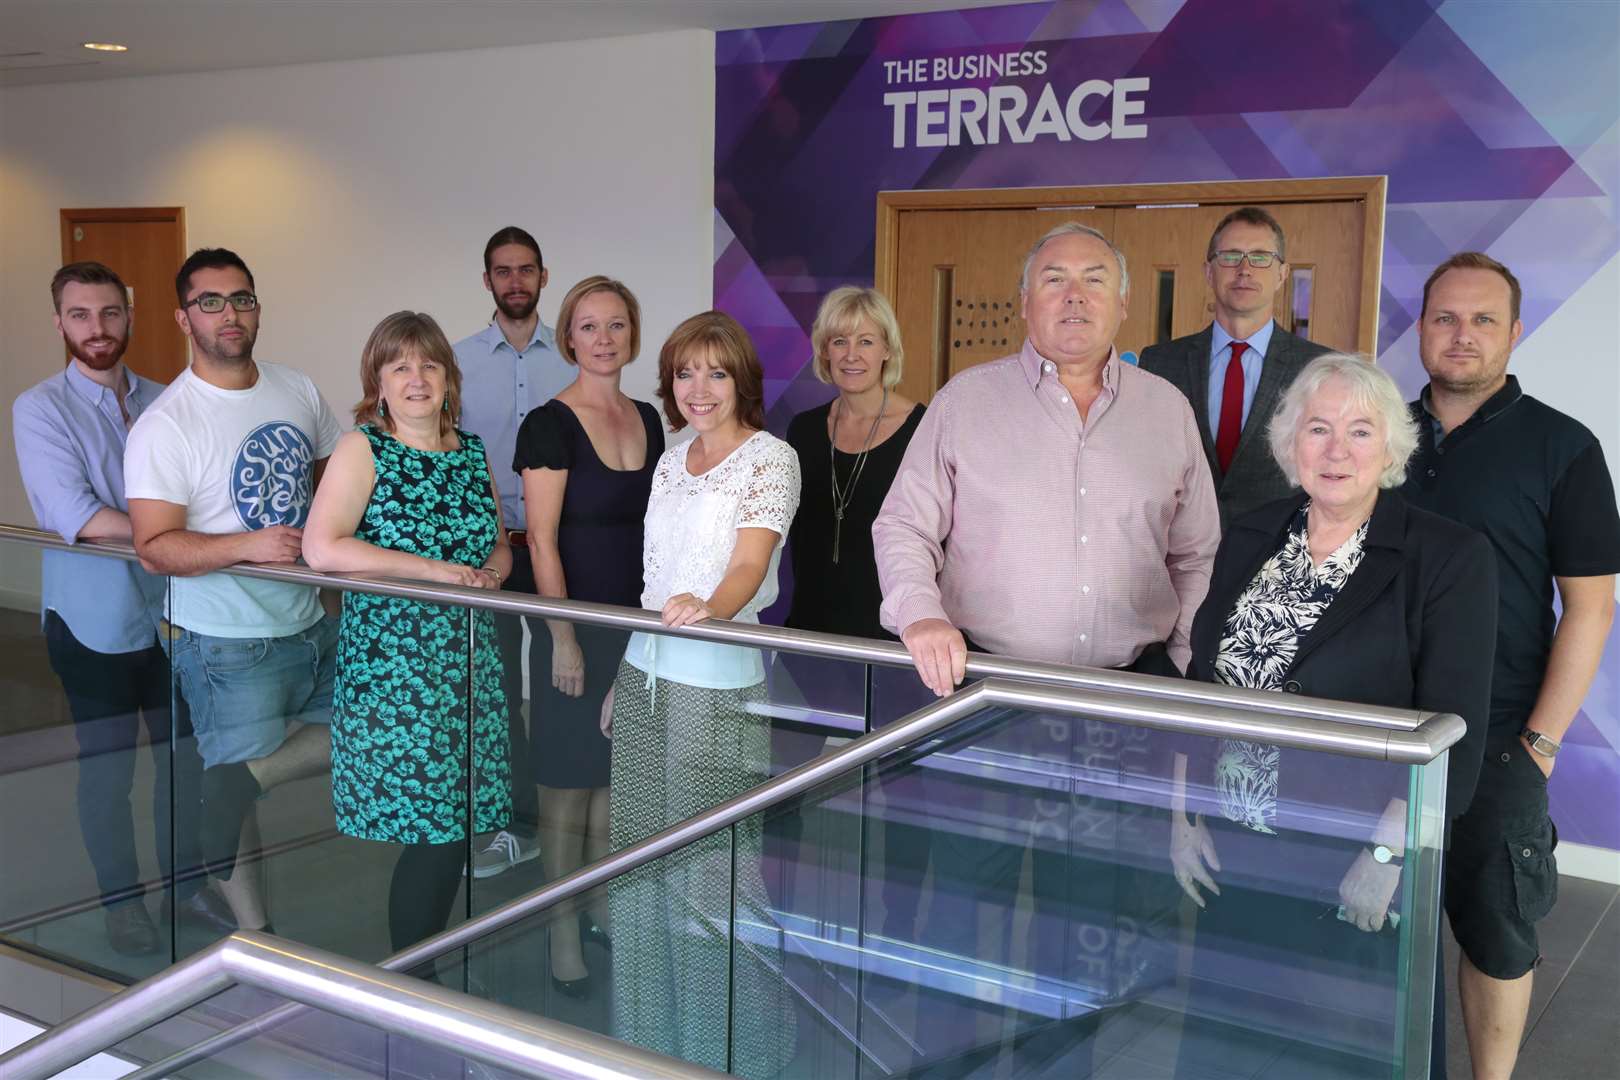 New offices opened for start-up and small businesses at the Business Terrace in Maidstone